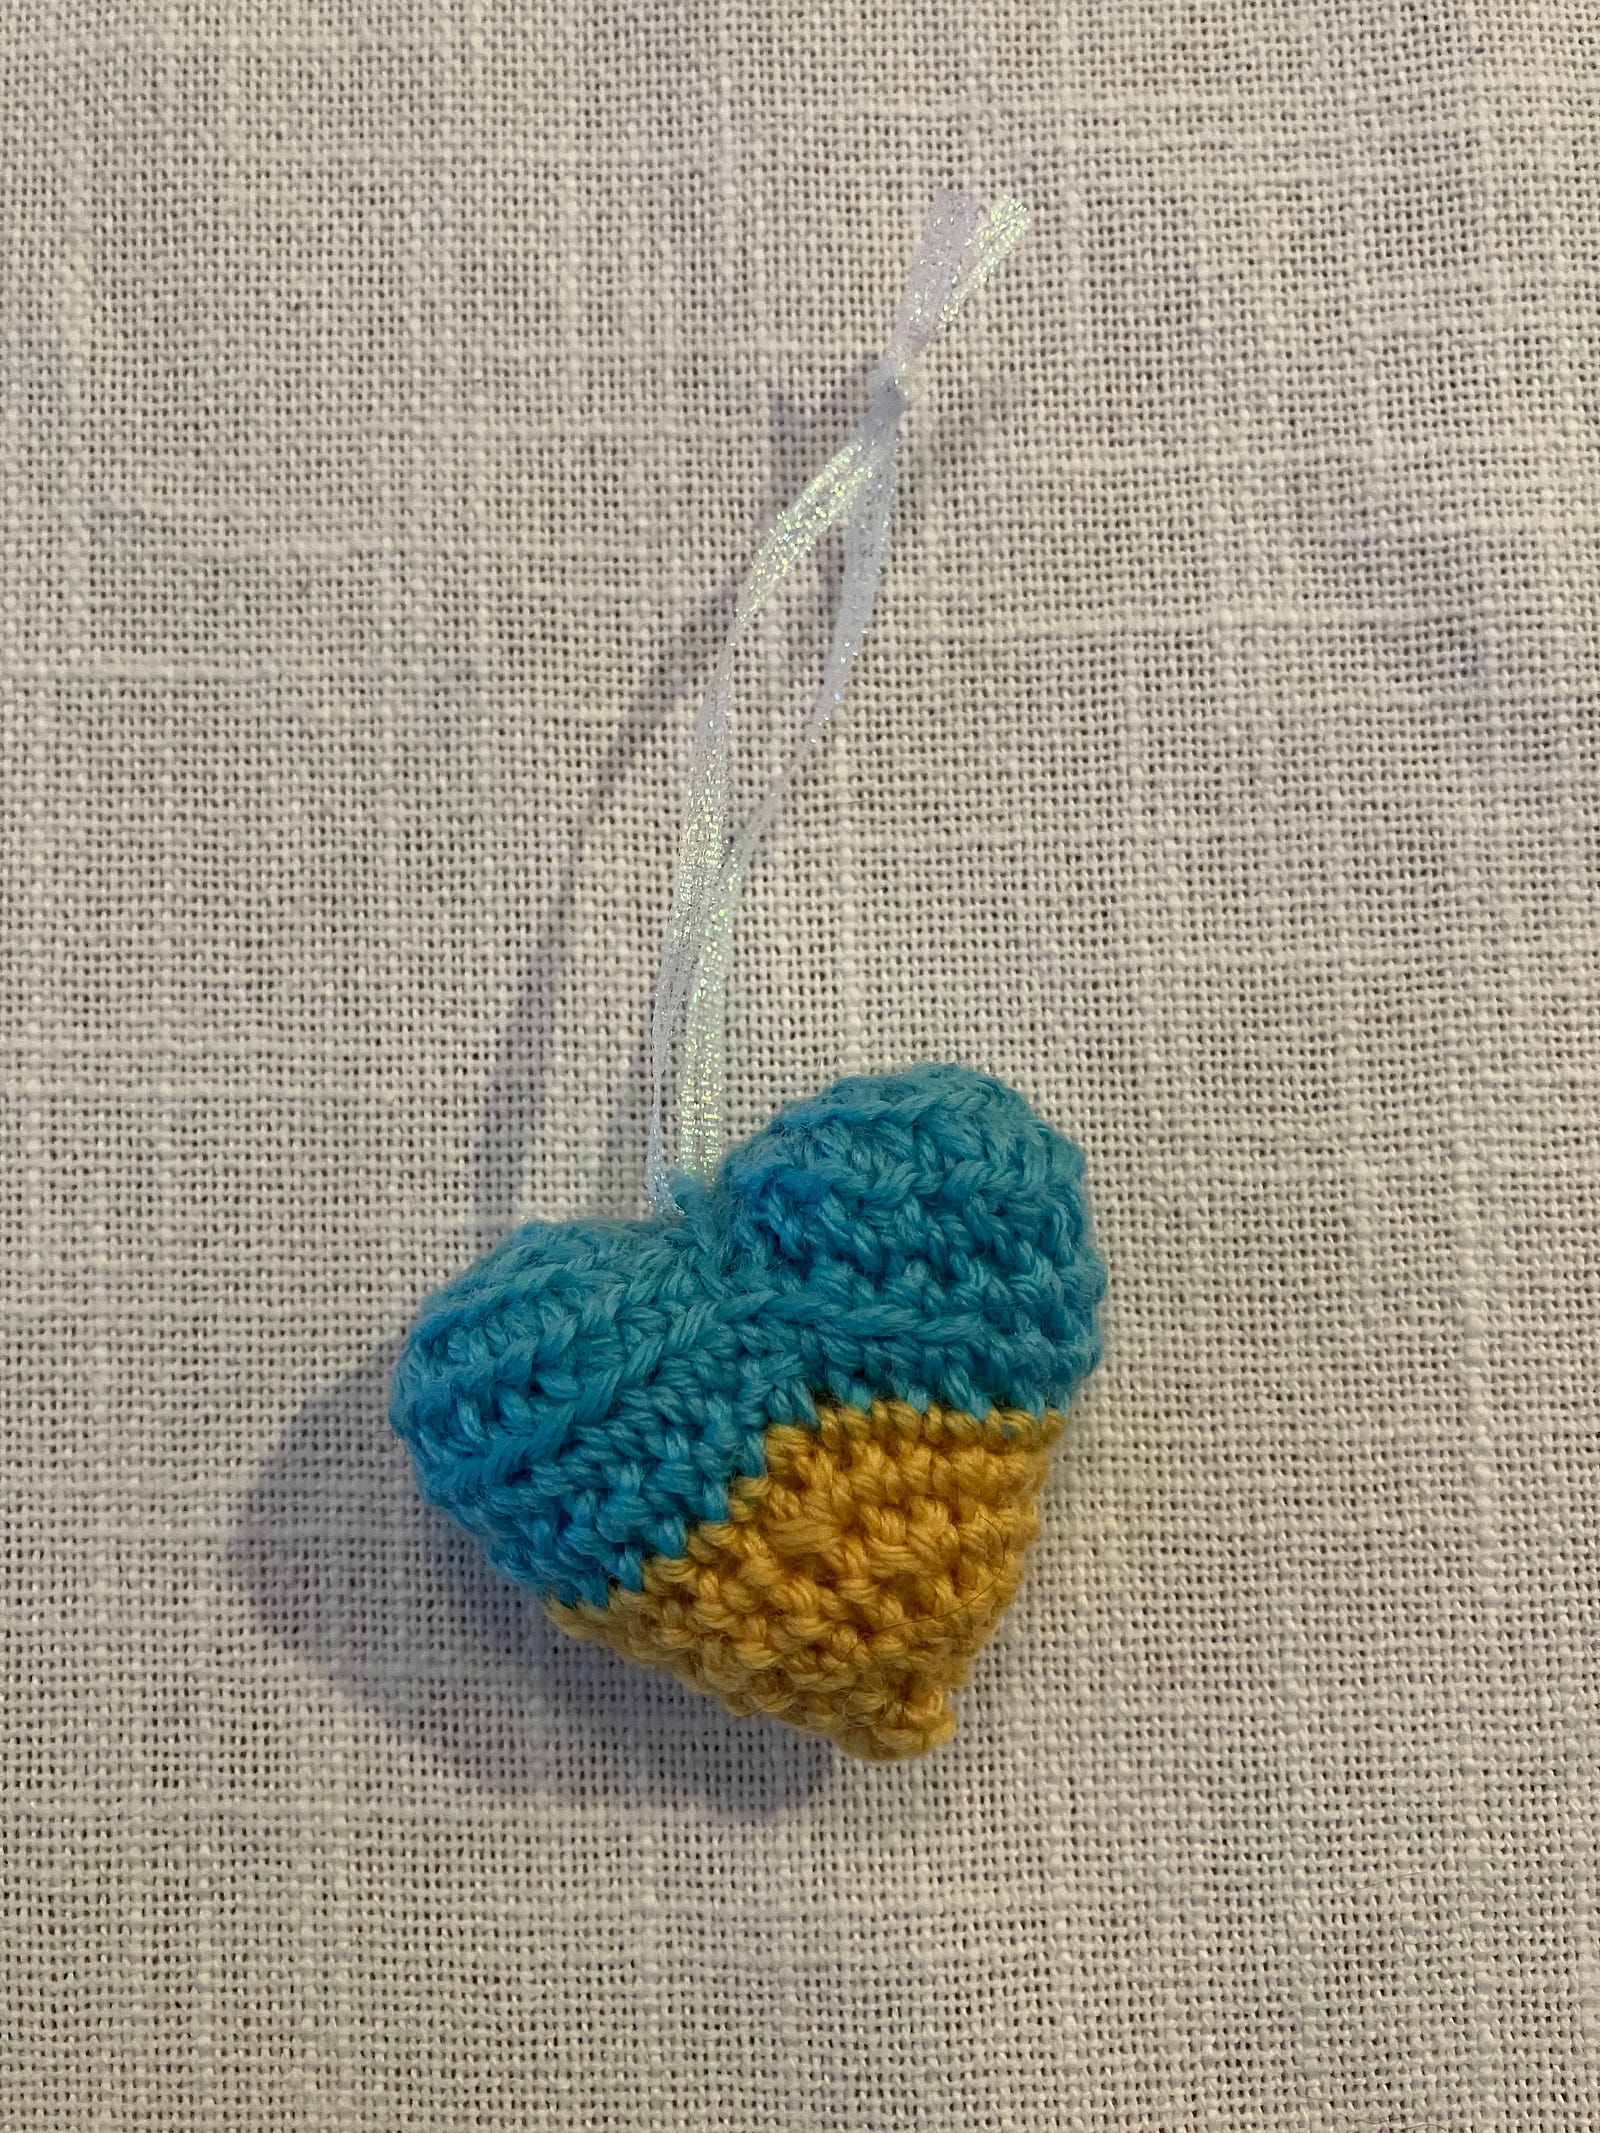 Small crocheted heart in the colors of the Ukrainian flag